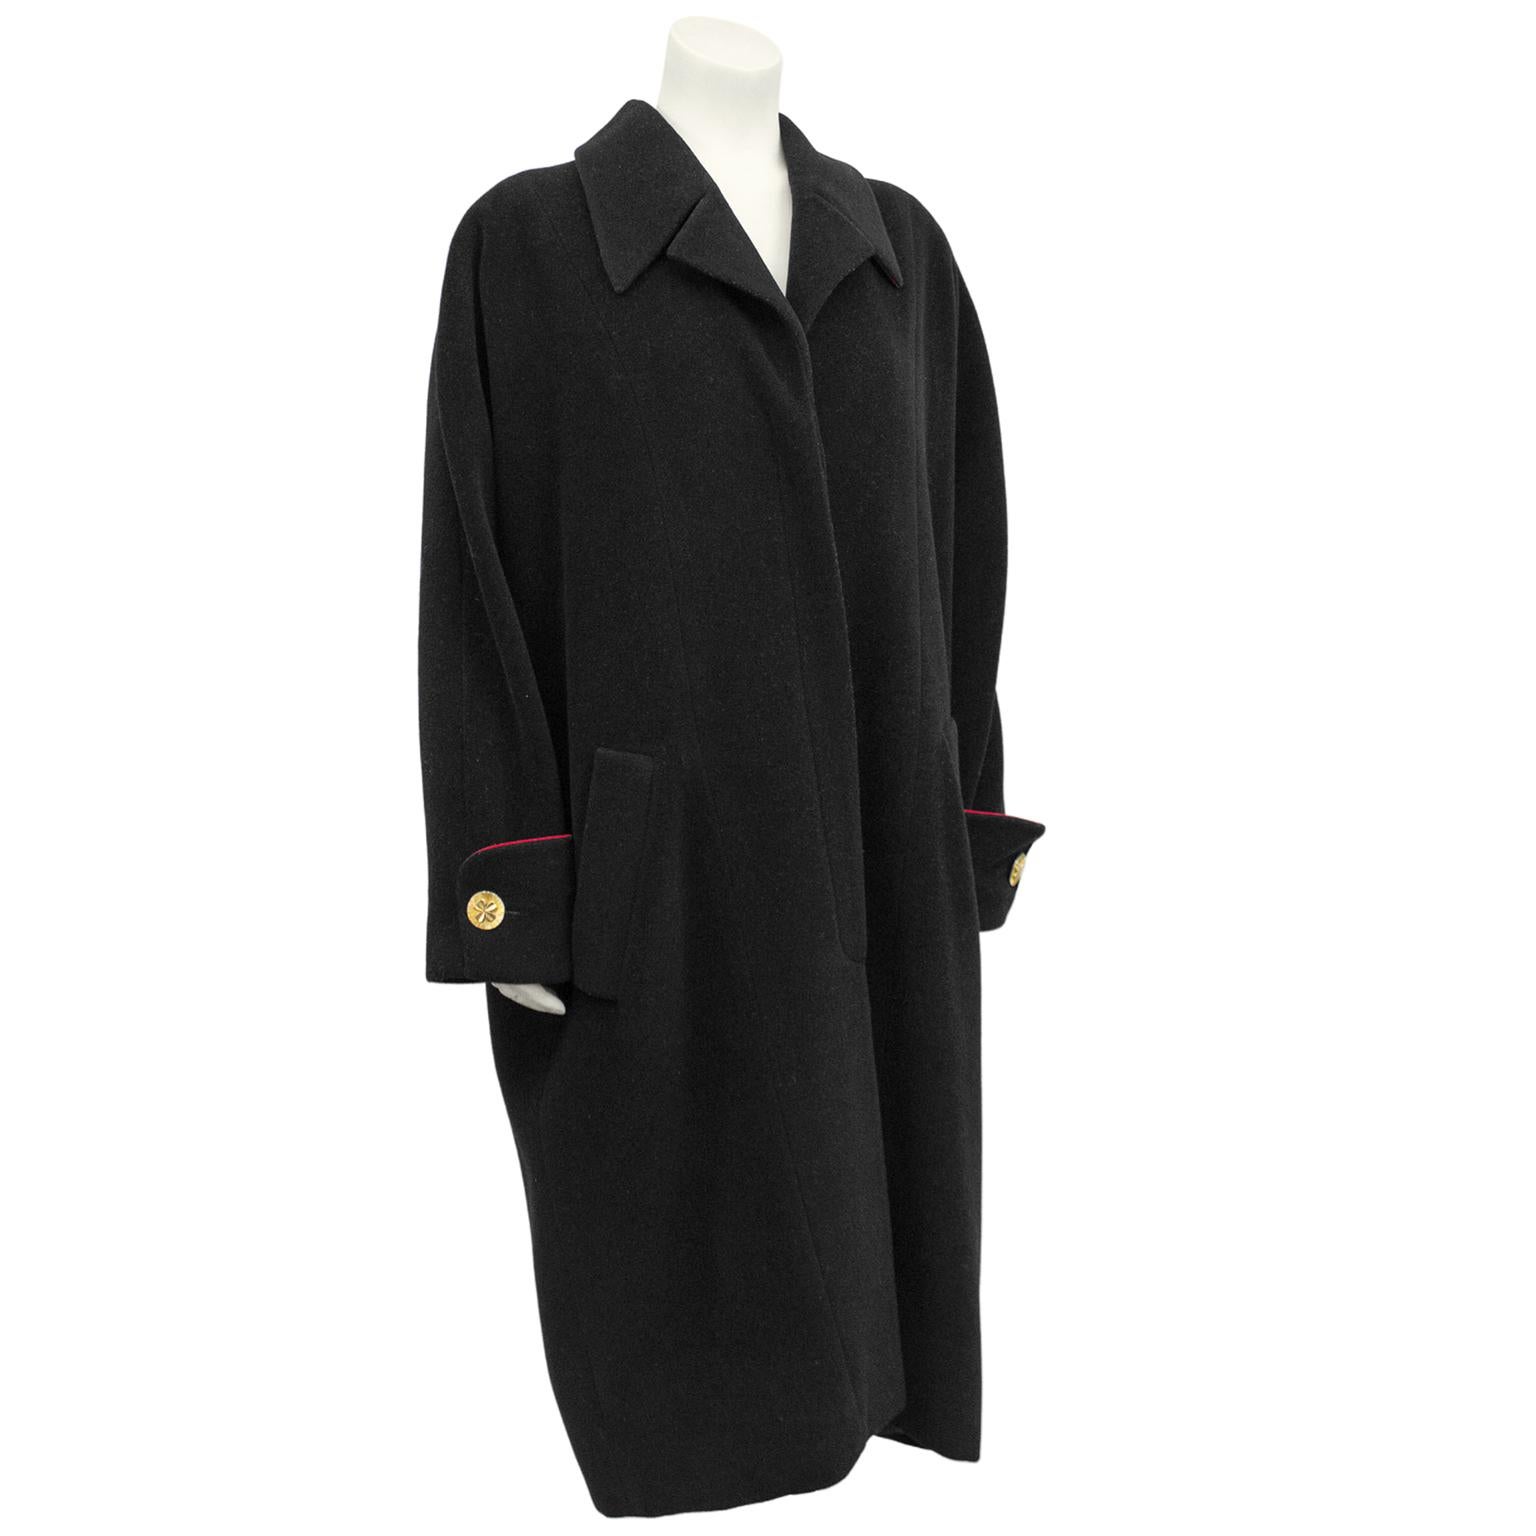 1990s Chanel black wool oversized cocoon coat with red piping on large French cuff. Classic oversized drop shoulder slouchy look that is chic on any shape and height. Contrasting red lining/trim throughout. Large gold buttons with four leaf clover